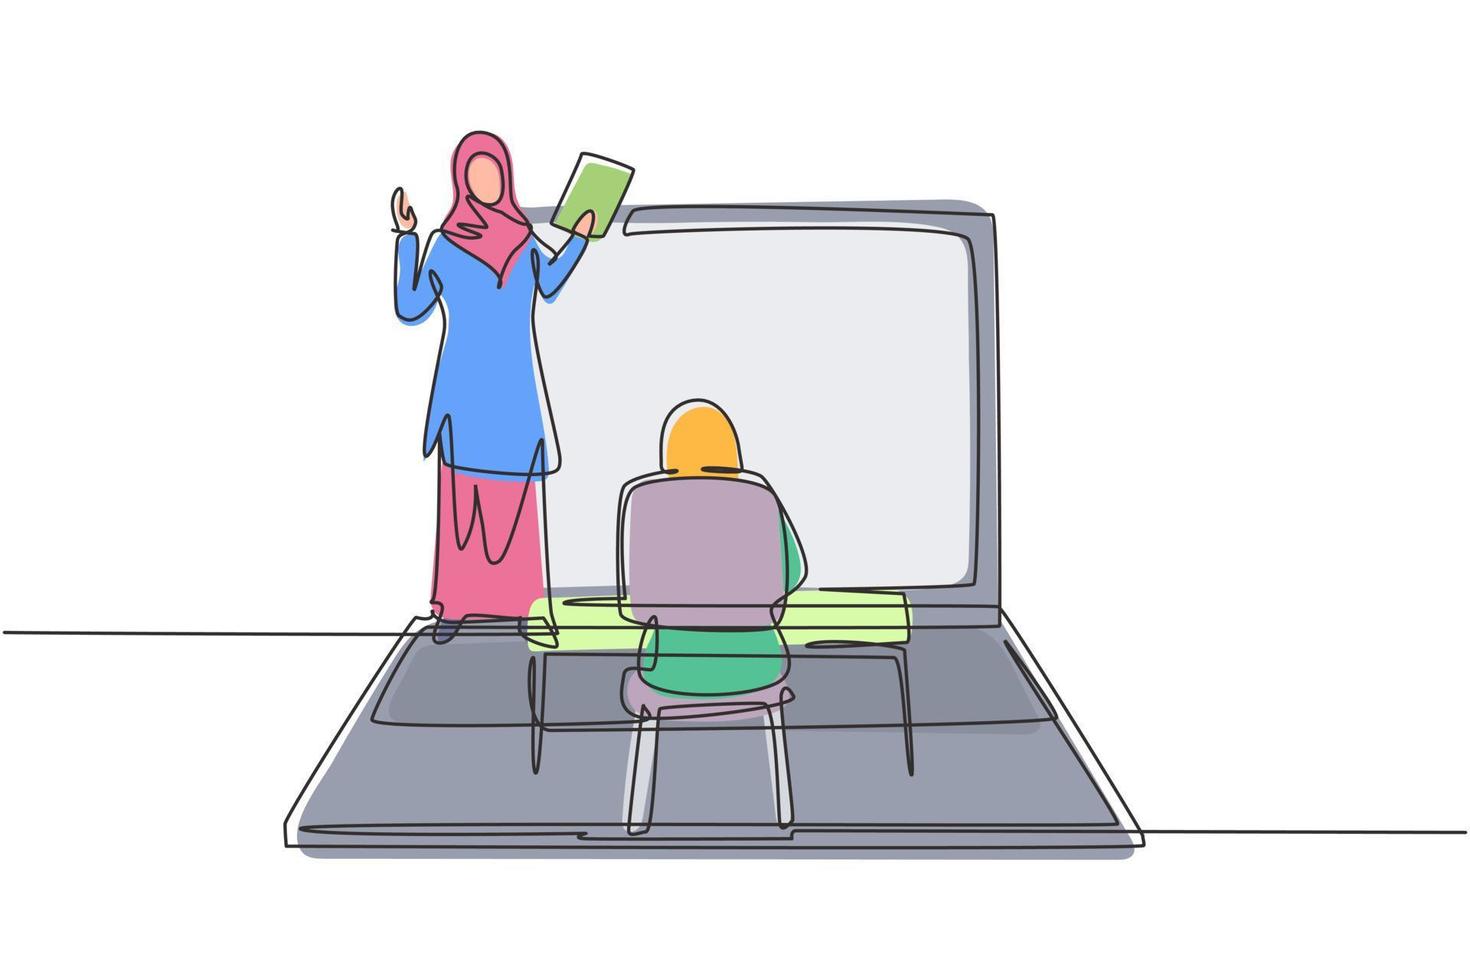 Continuous one line drawing Arabian female teacher standing in front of laptop screen holding book and teaching hijab female students sitting on benches around desk. Single design vector illustration